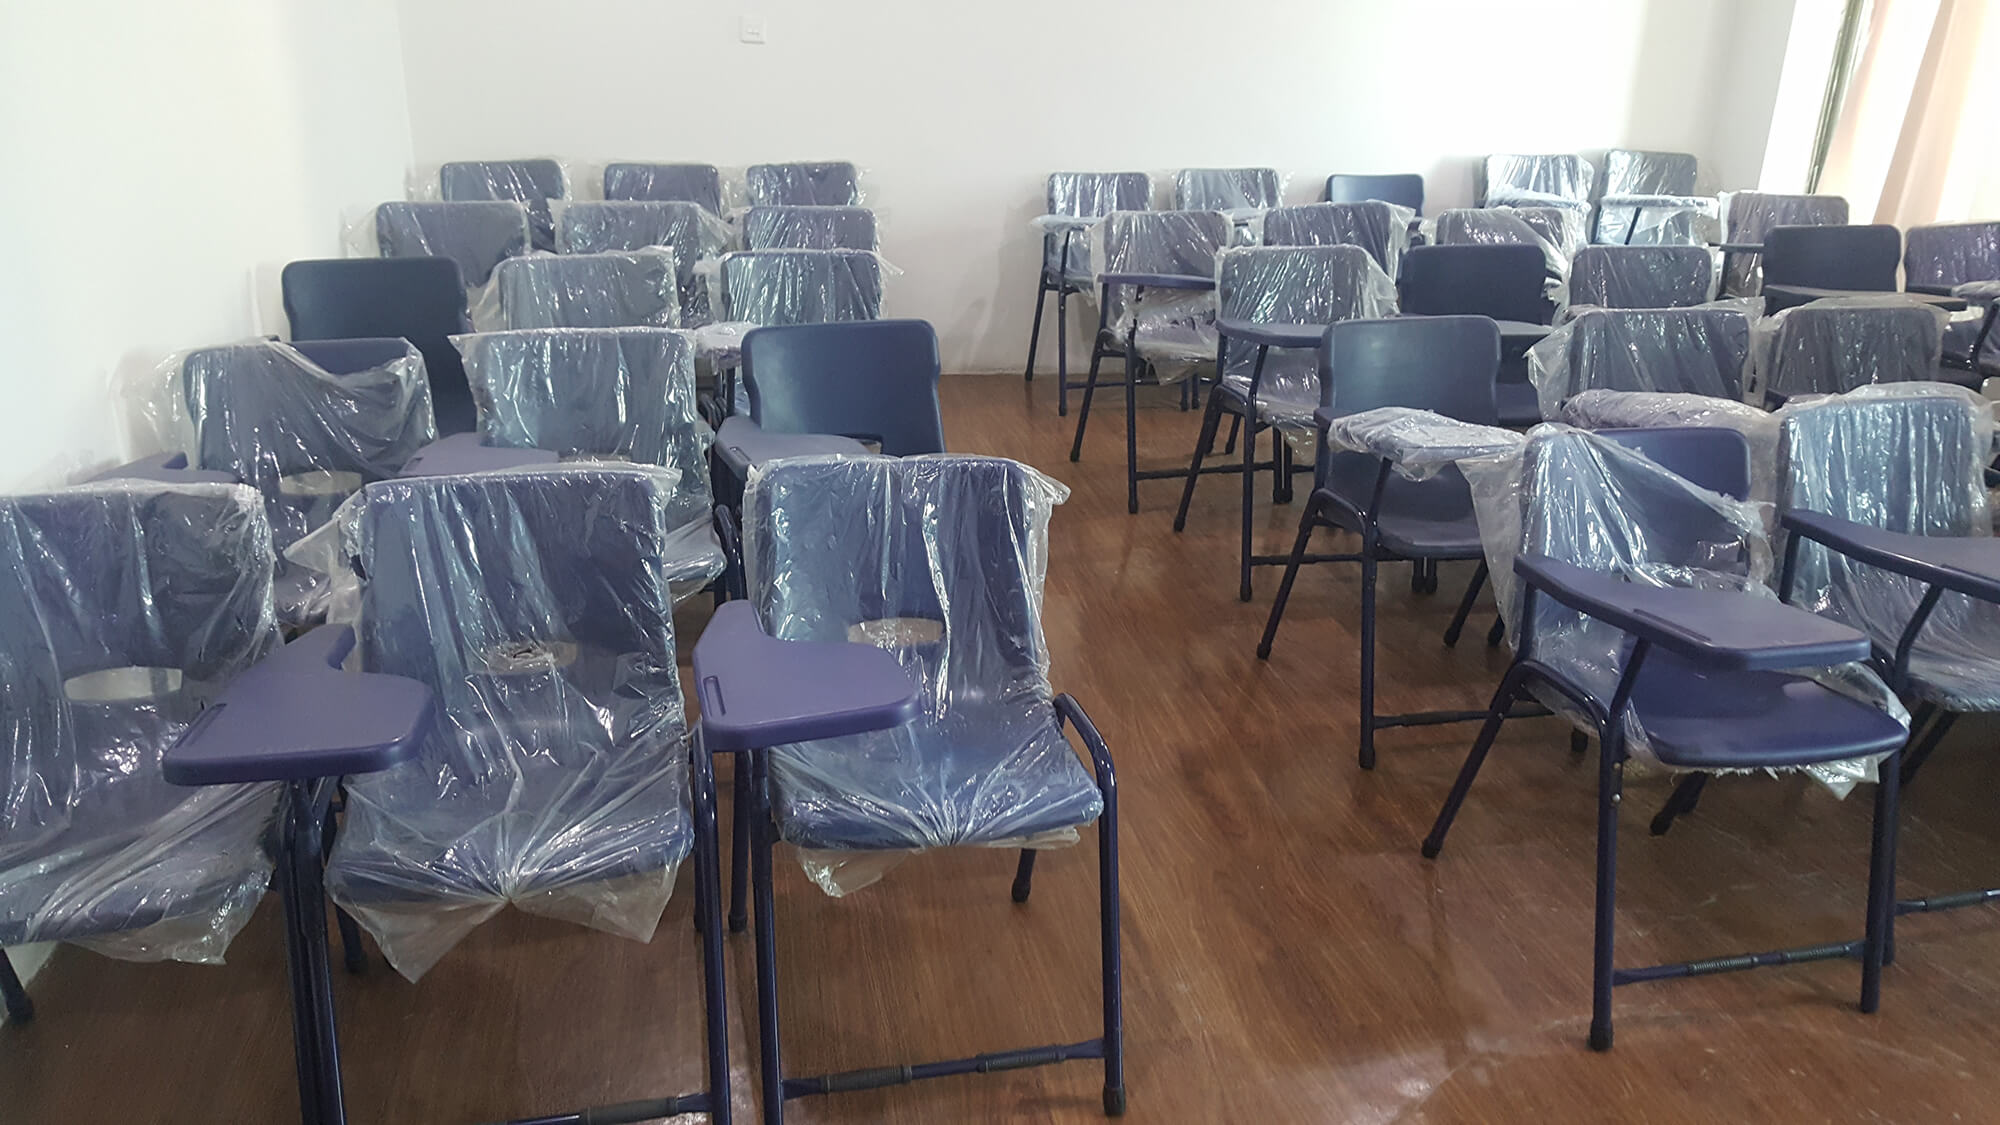 Lecture Halls 15